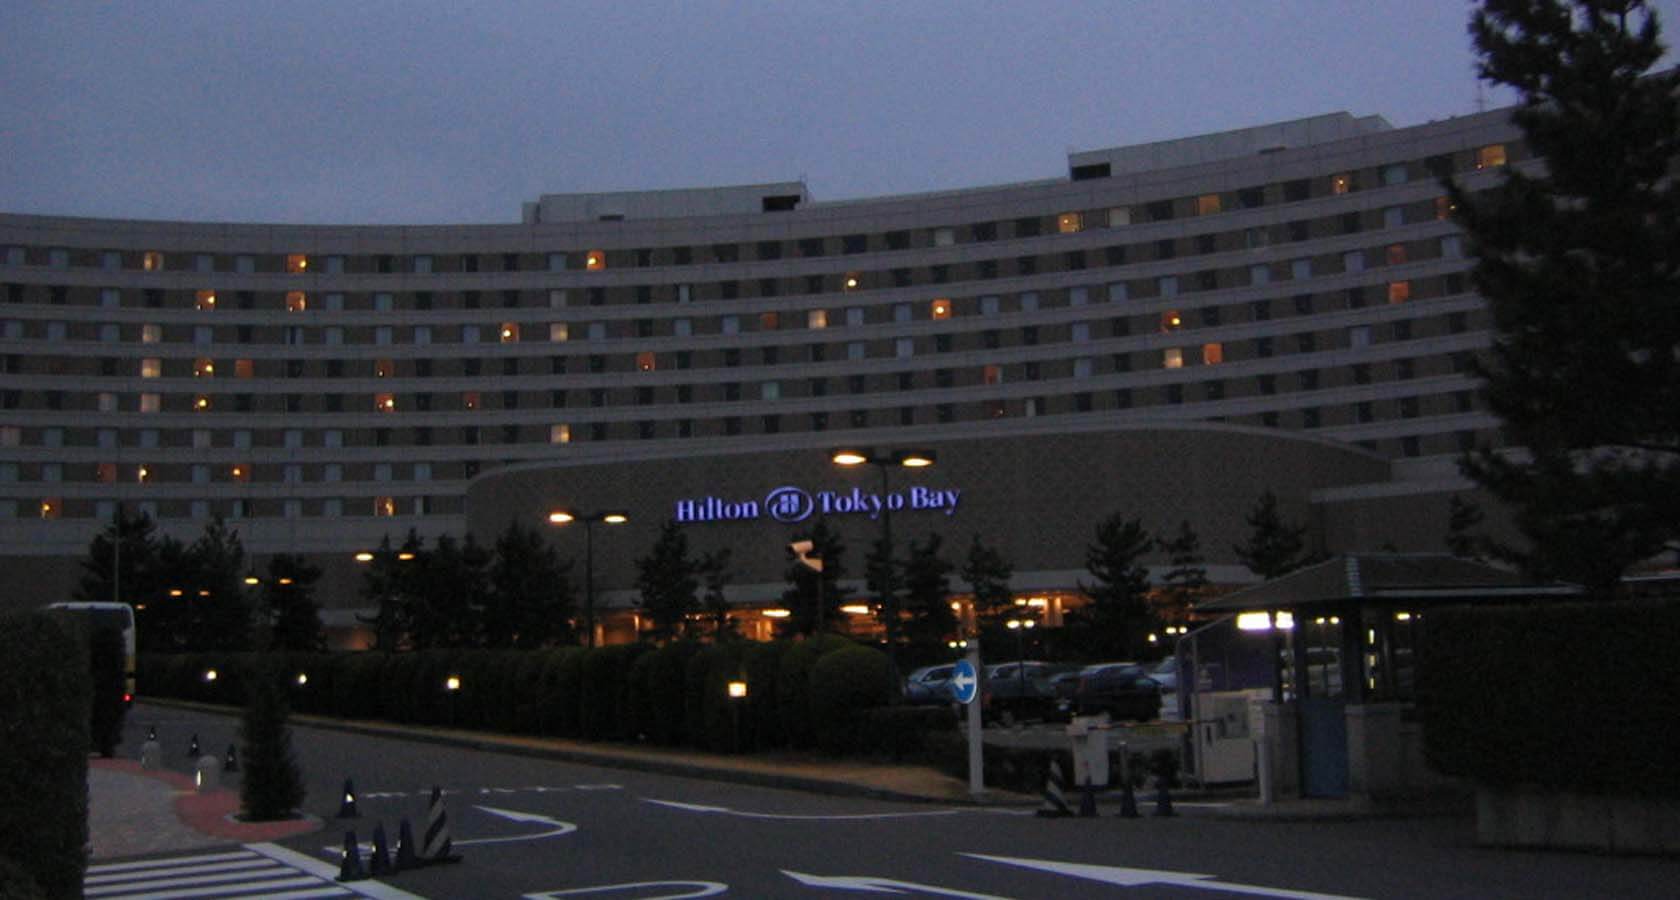 Hilton Tokyo Bay: Featuring Family Friendly Themed Rooms - Tokyo.com